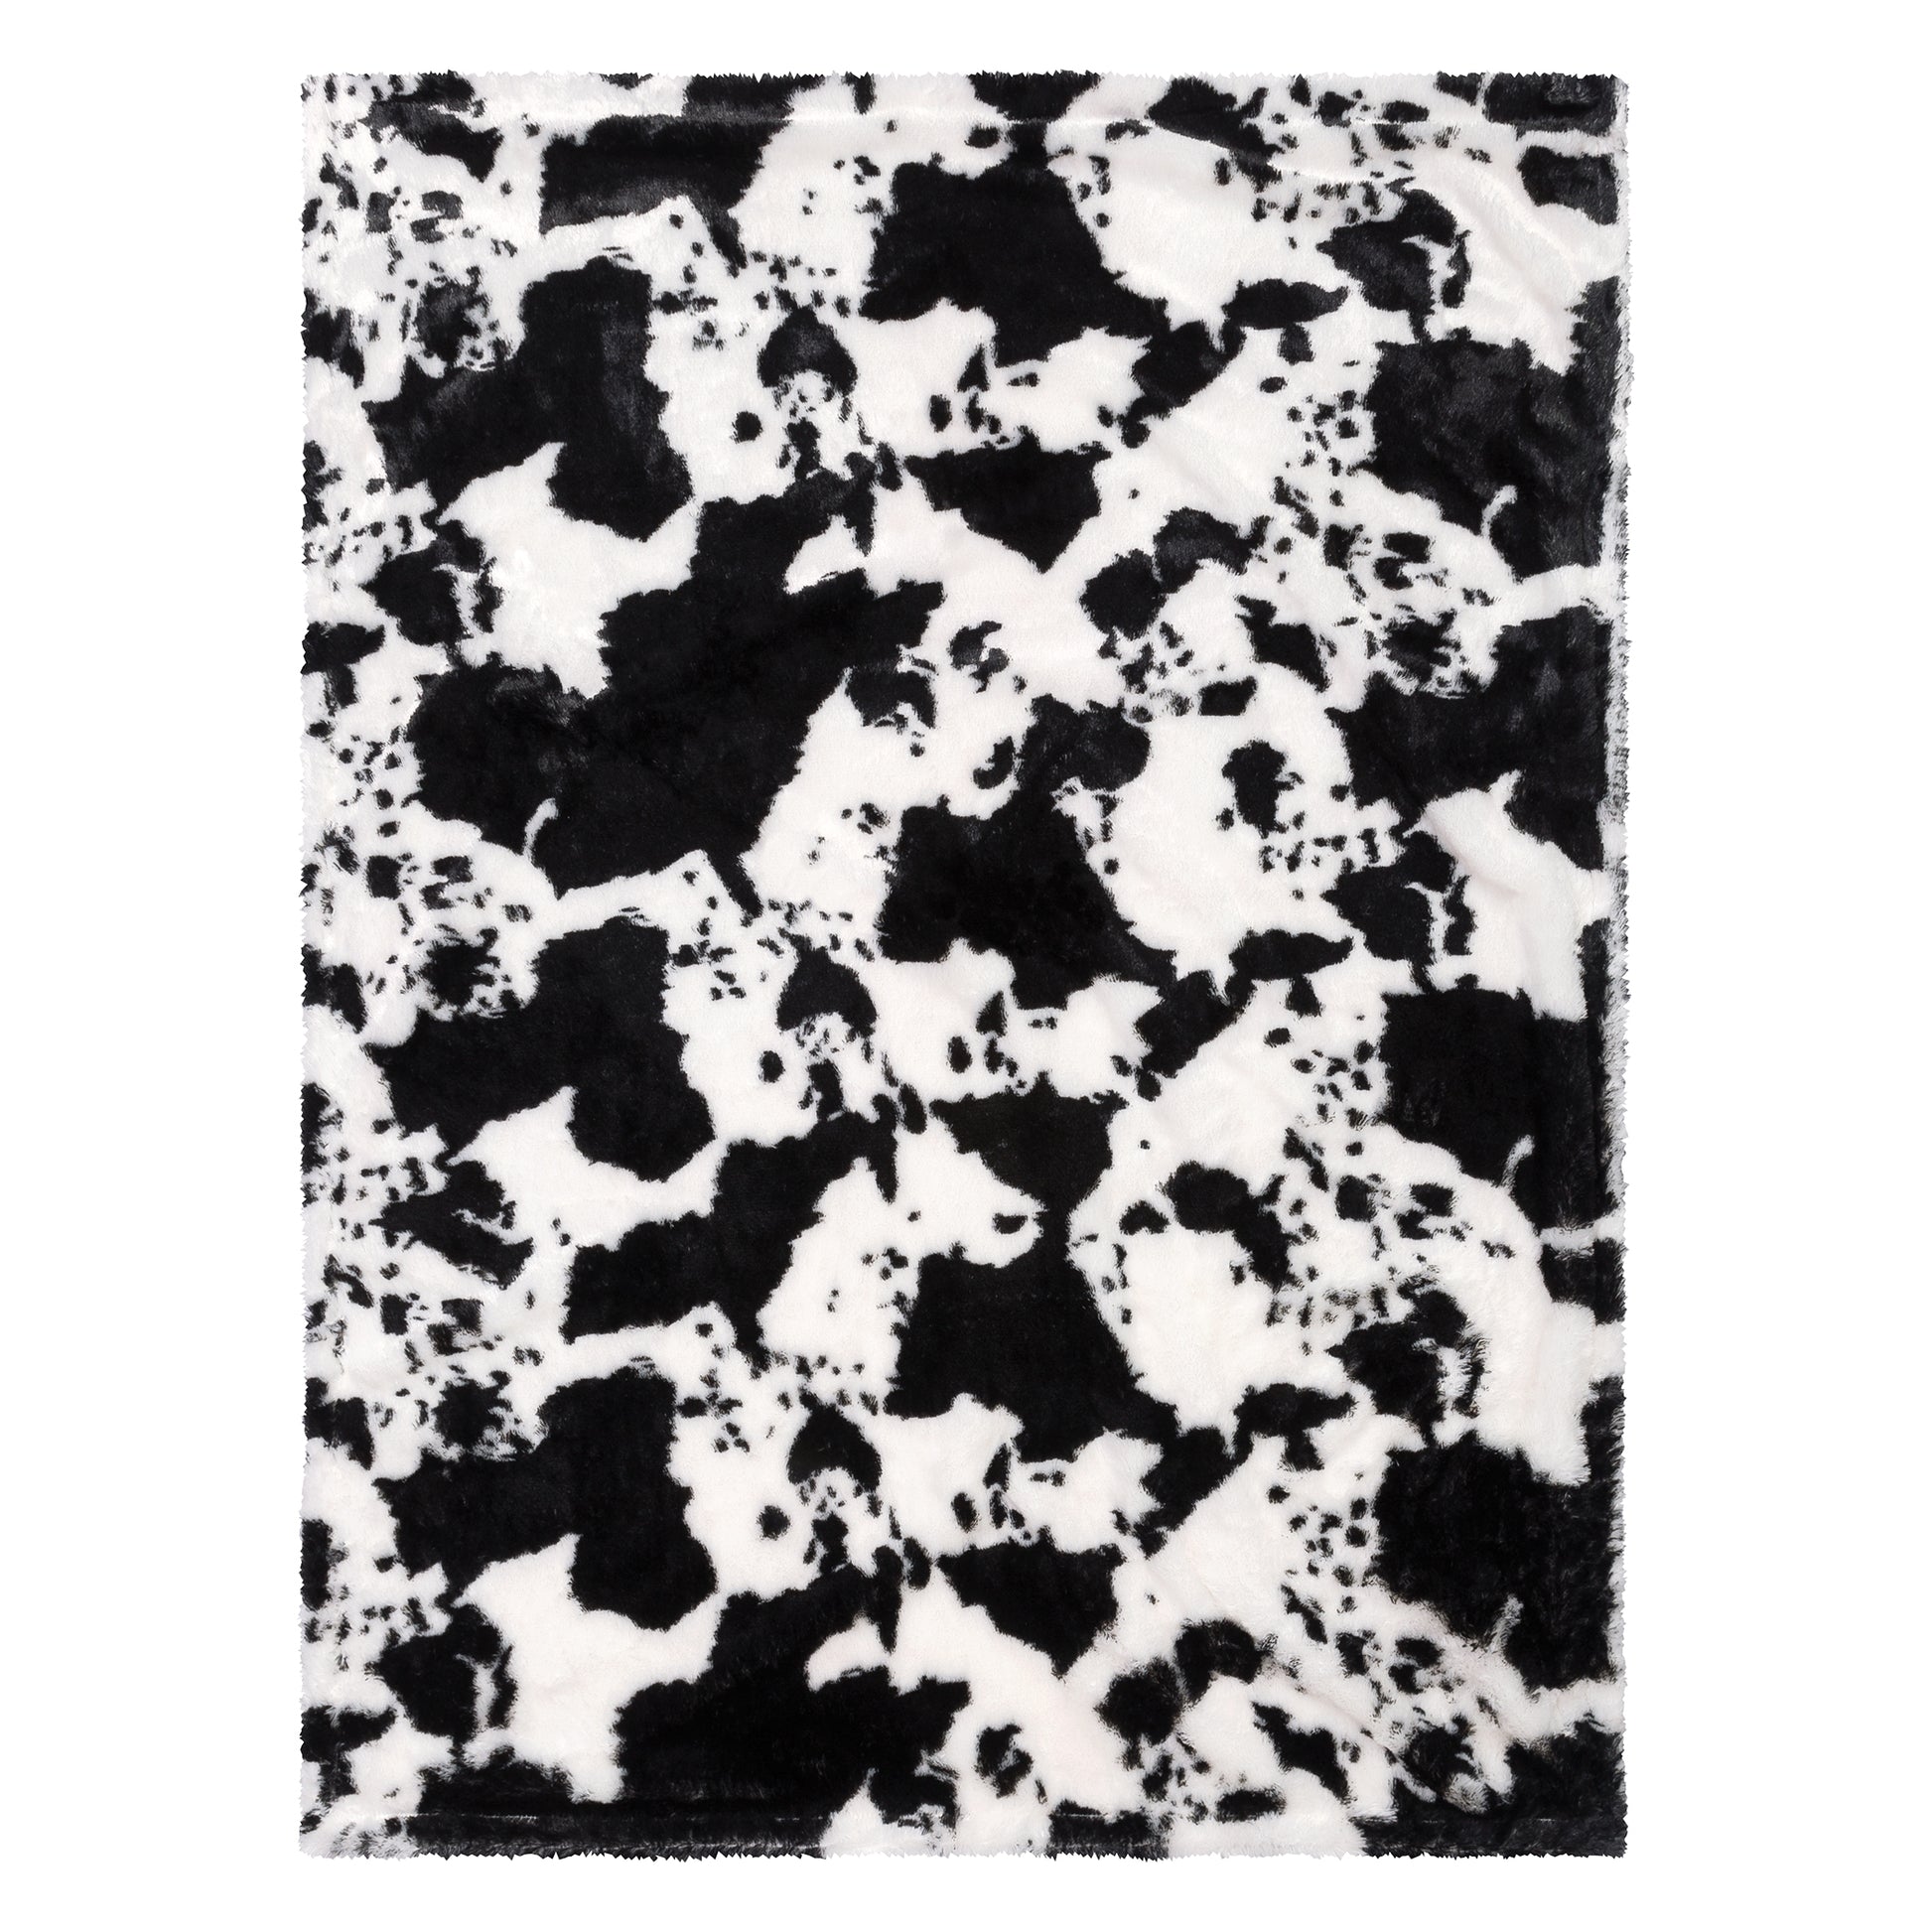  Cow Print Plush Baby Blanket; laid out